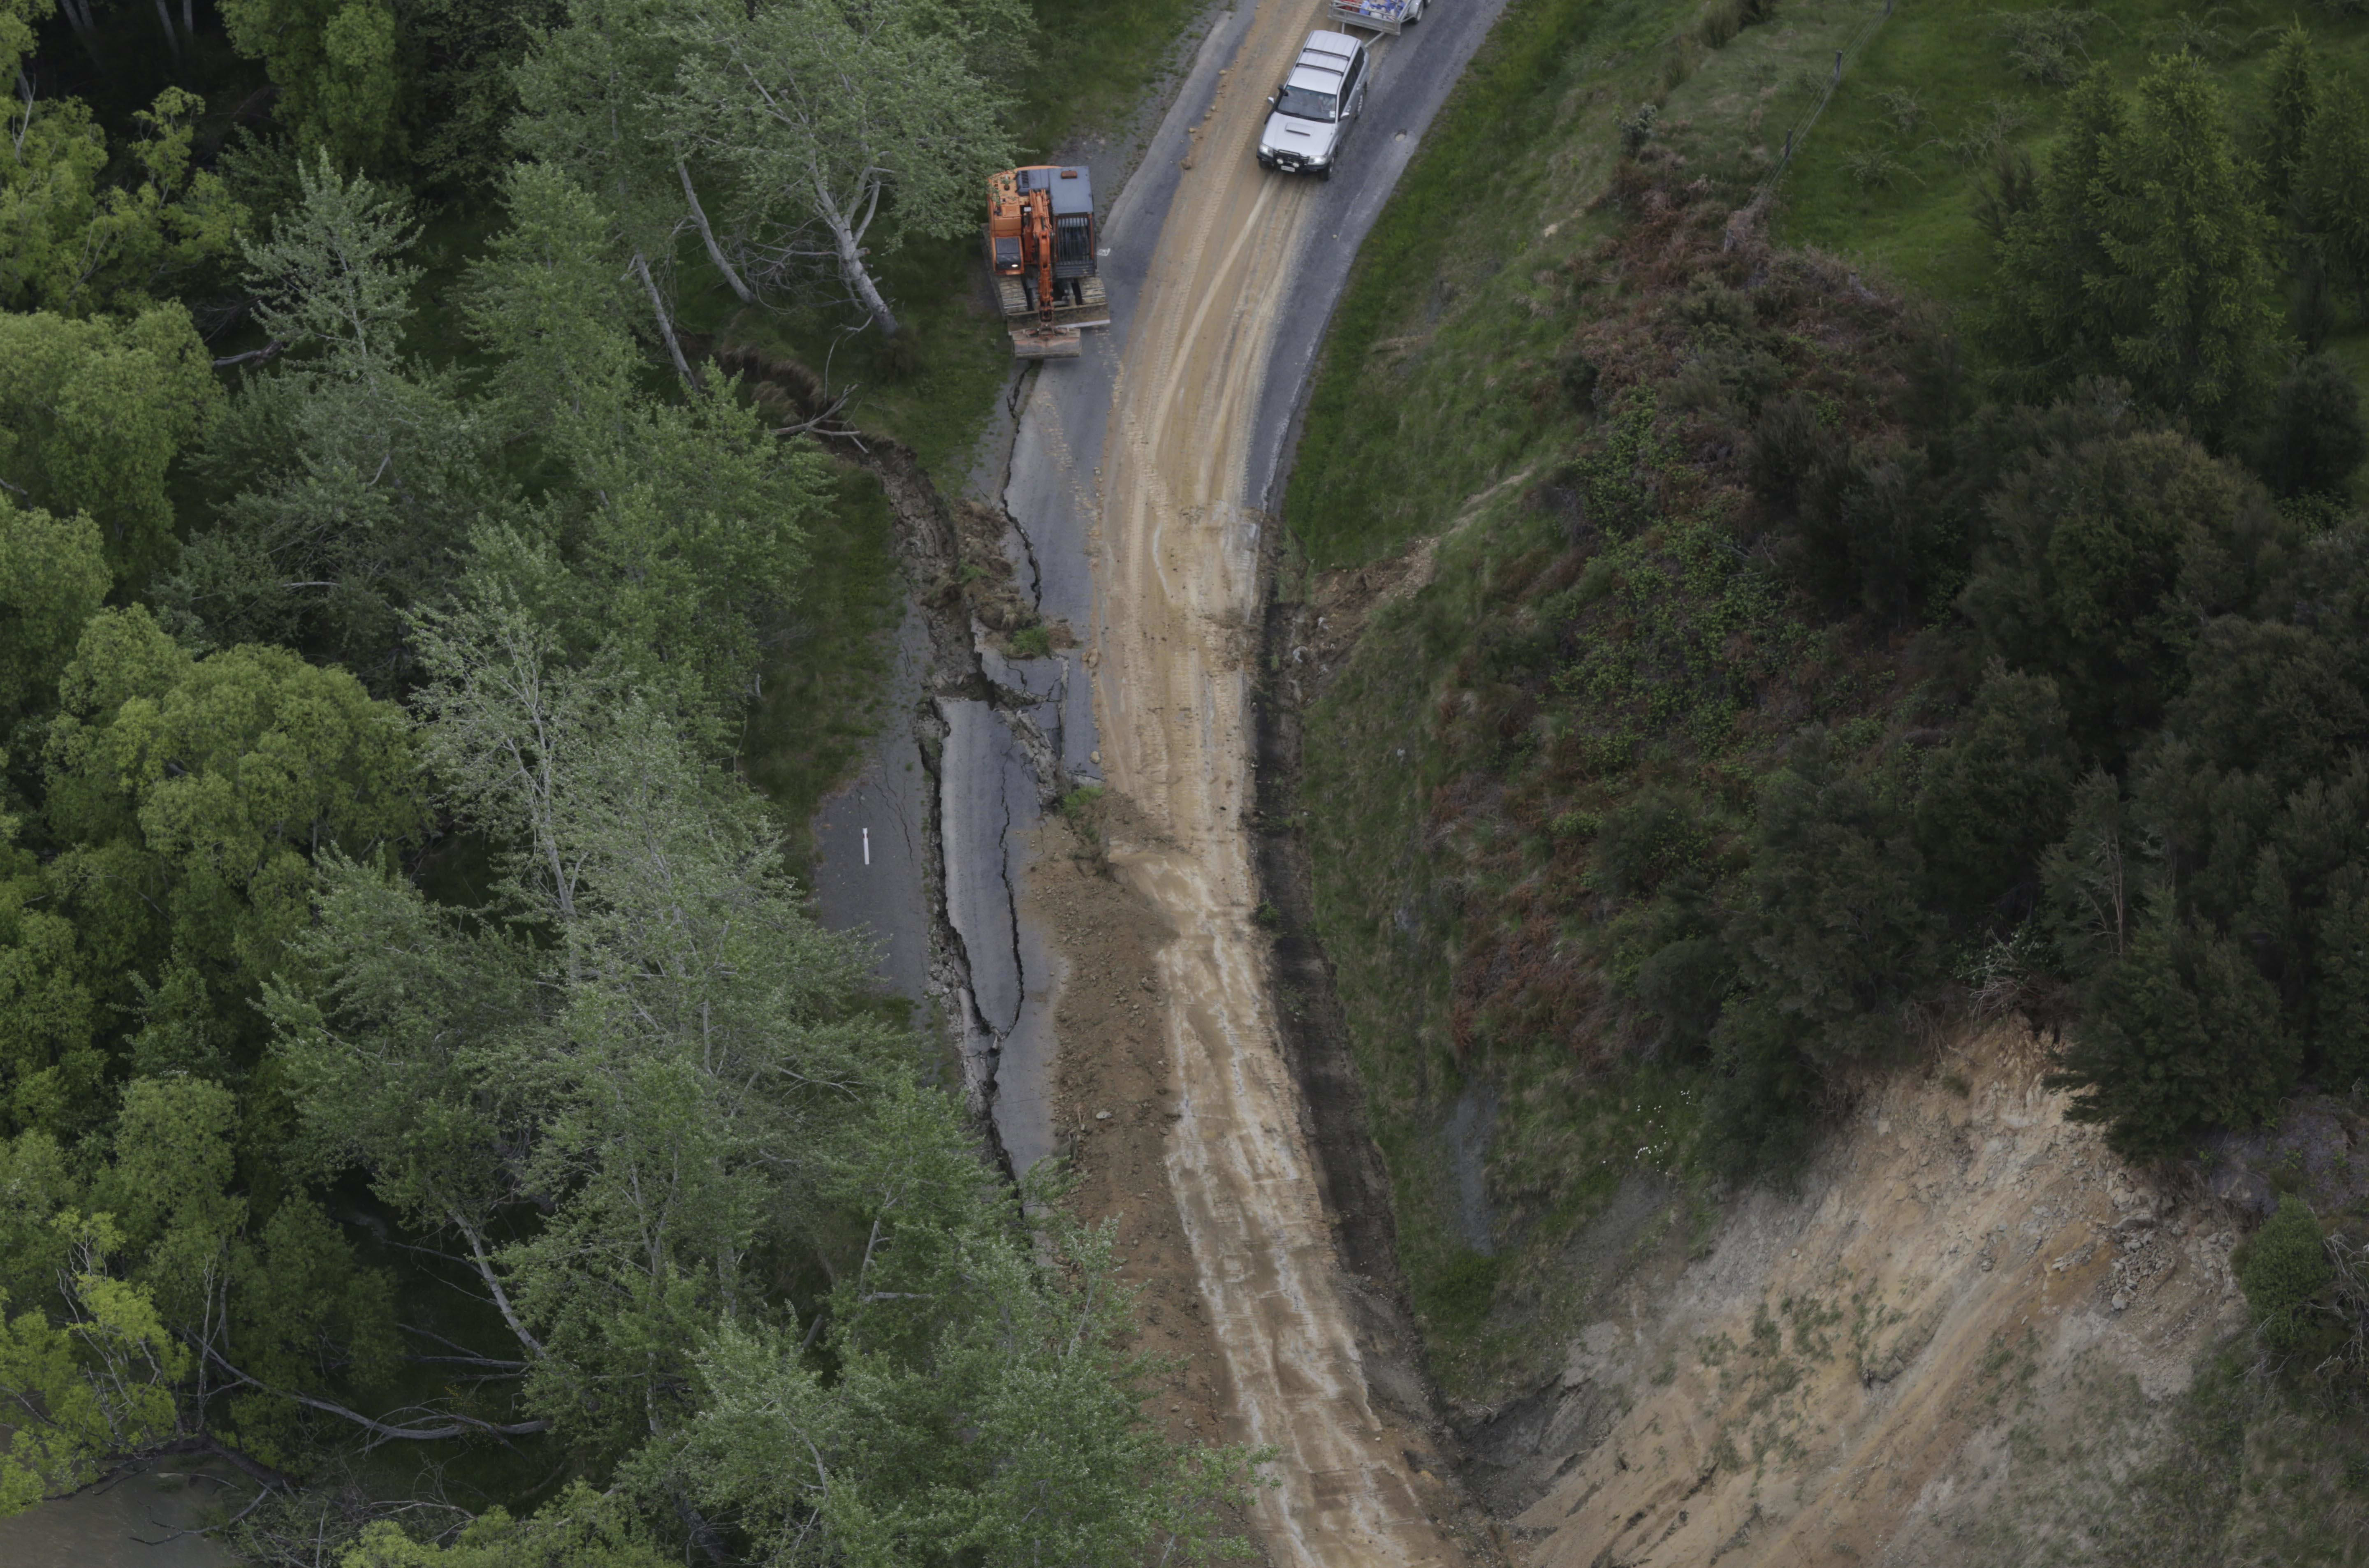 Road between Kaikoura and Mt Lyford - damage to road, digger beginning work